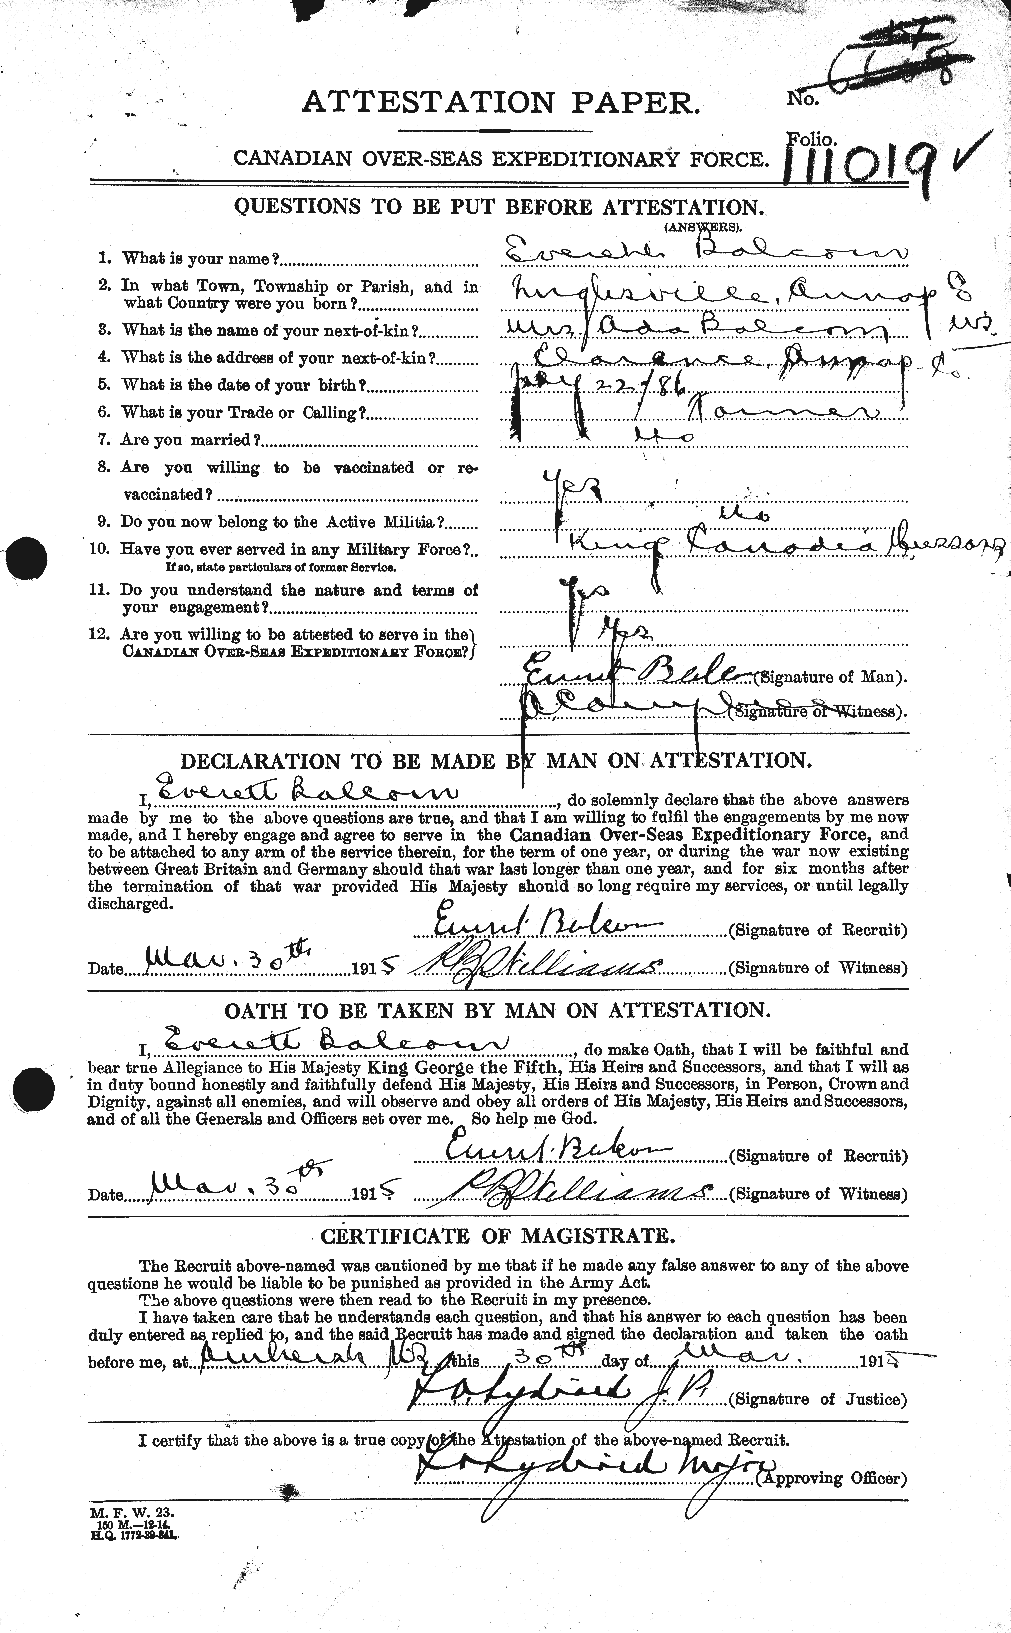 Personnel Records of the First World War - CEF 225442a